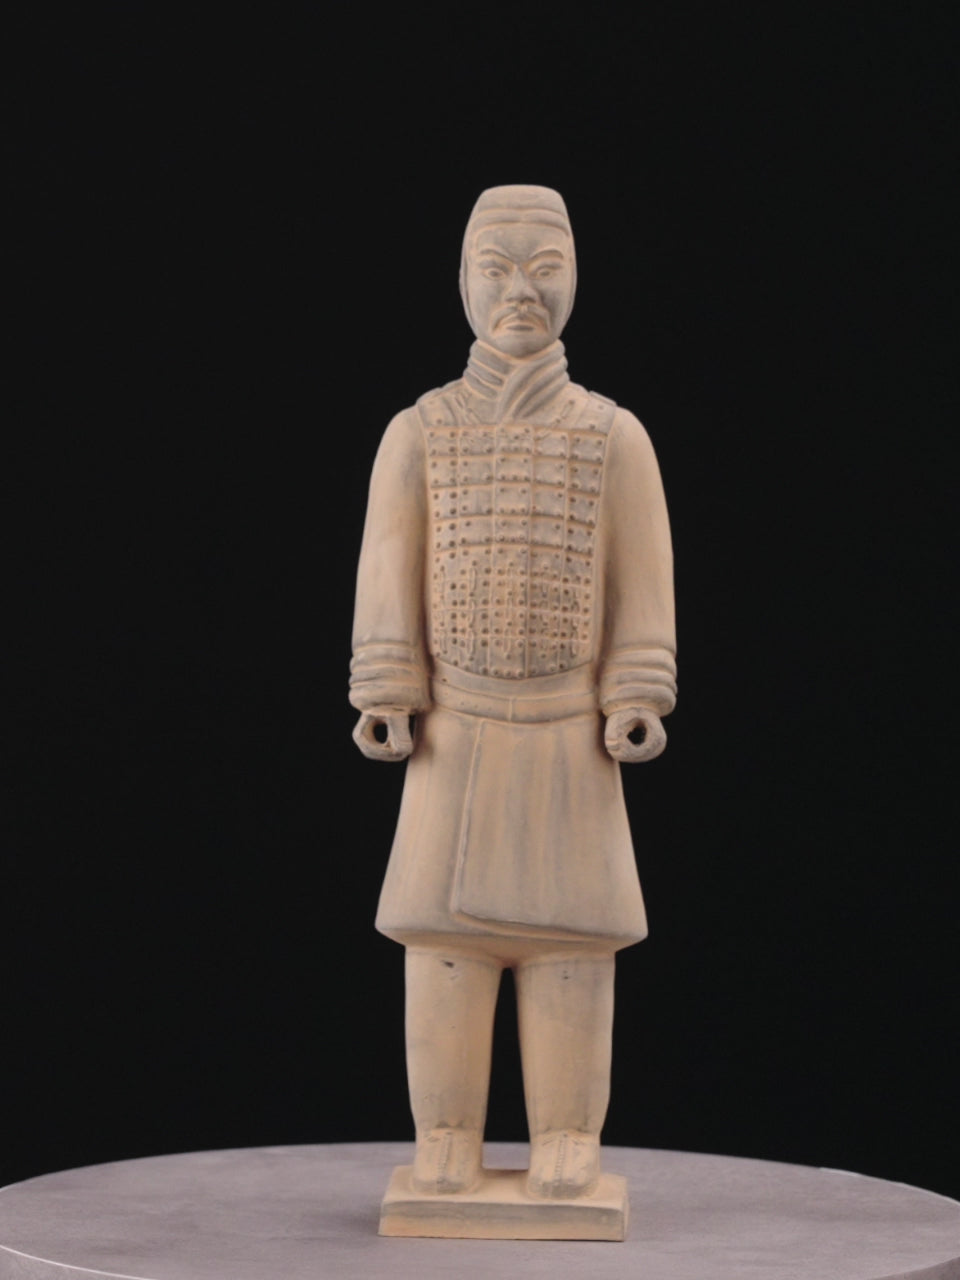 Experience the dynamic presentation of the 35CM Terracotta Army Cavalryman in this engaging video. Explore the elaborate details of the flat bun, knee-length jacket, and leather boots from different angles. Witness the historical accuracy and action-oriented pose captured in this finely crafted replica.